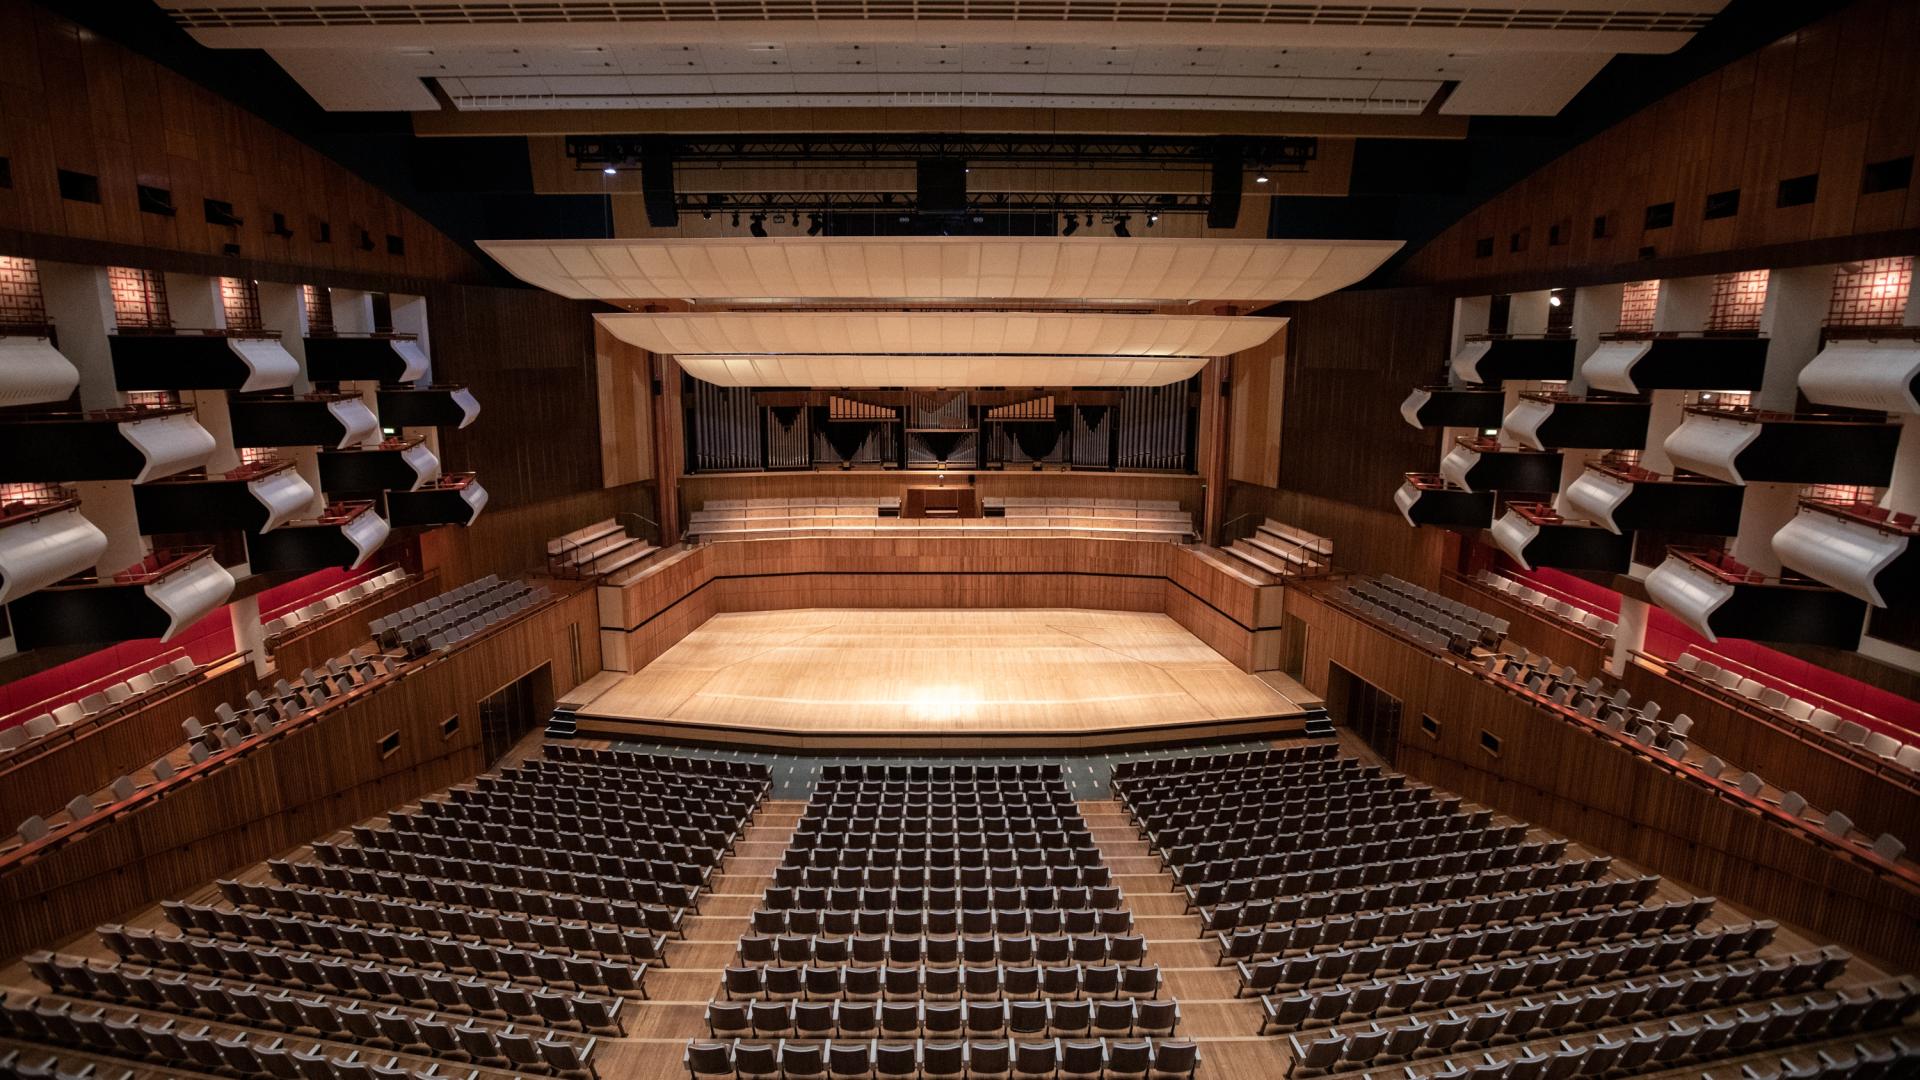 Find your Performance Venue in London